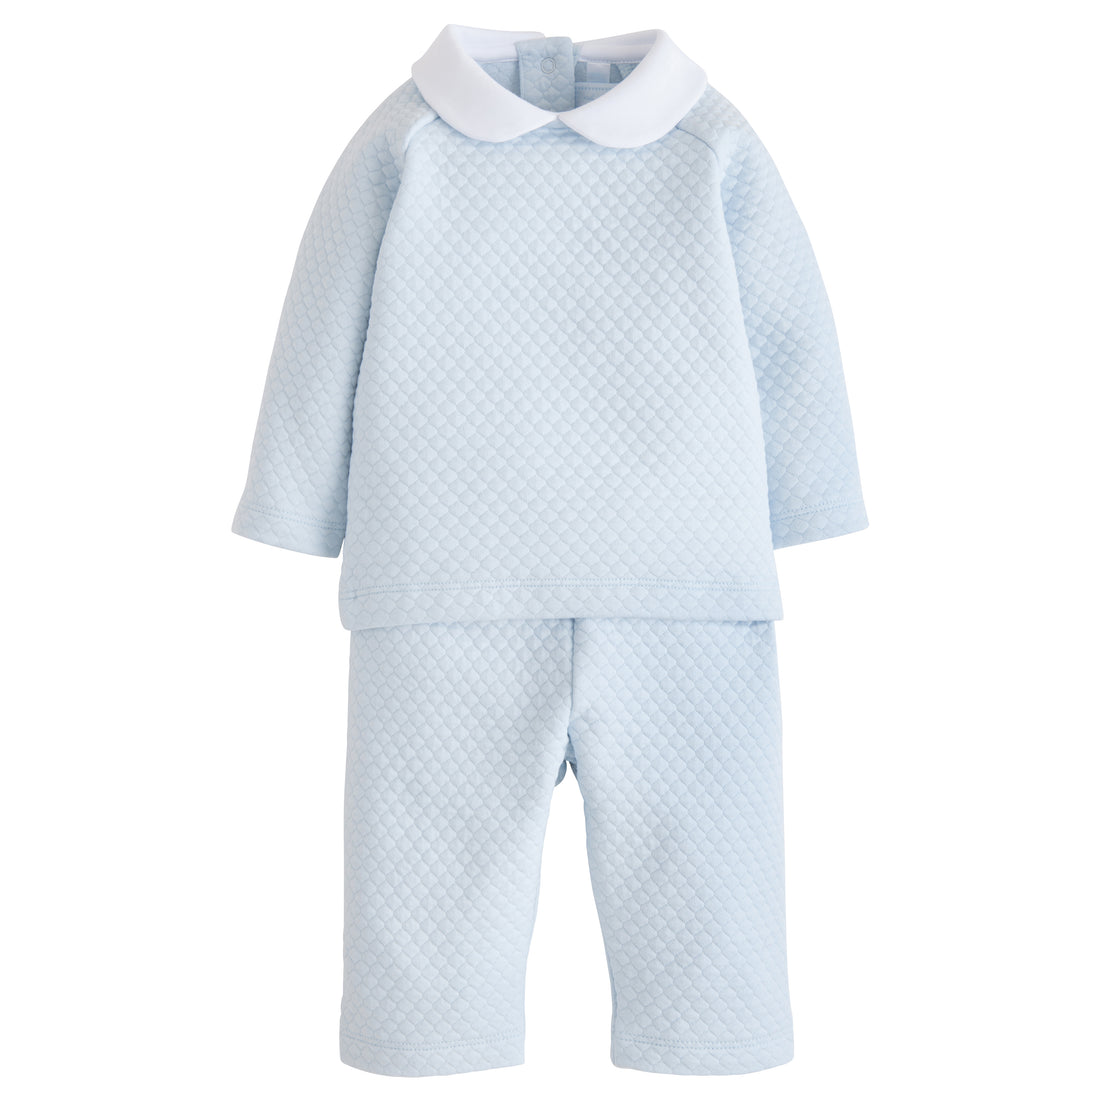 Little English traditional baby clothing, little boy&